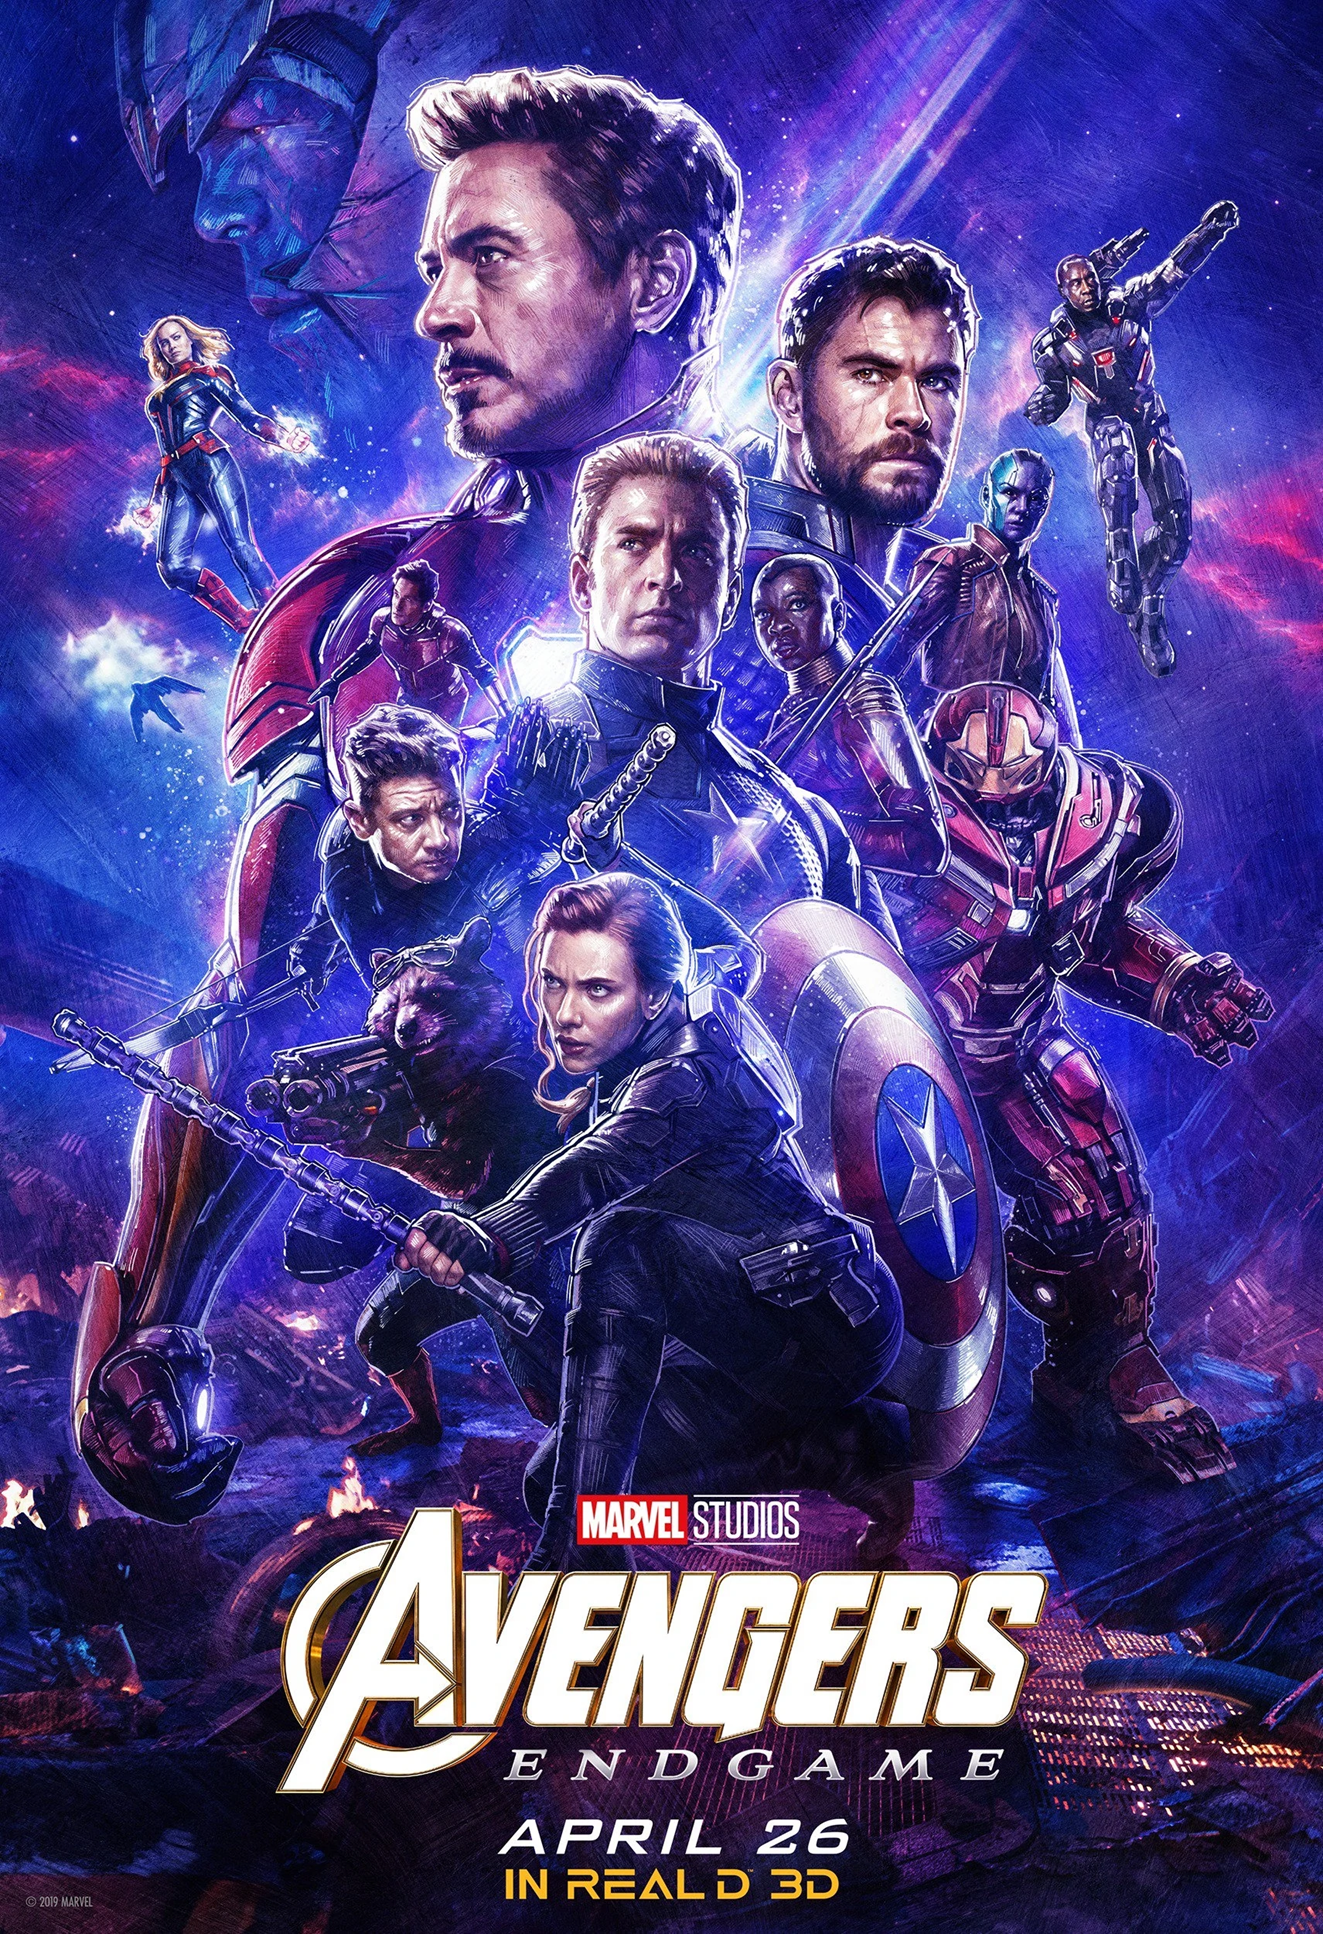 The Real Hero – Alan Silvestri The Real Hero - Avengers End Game